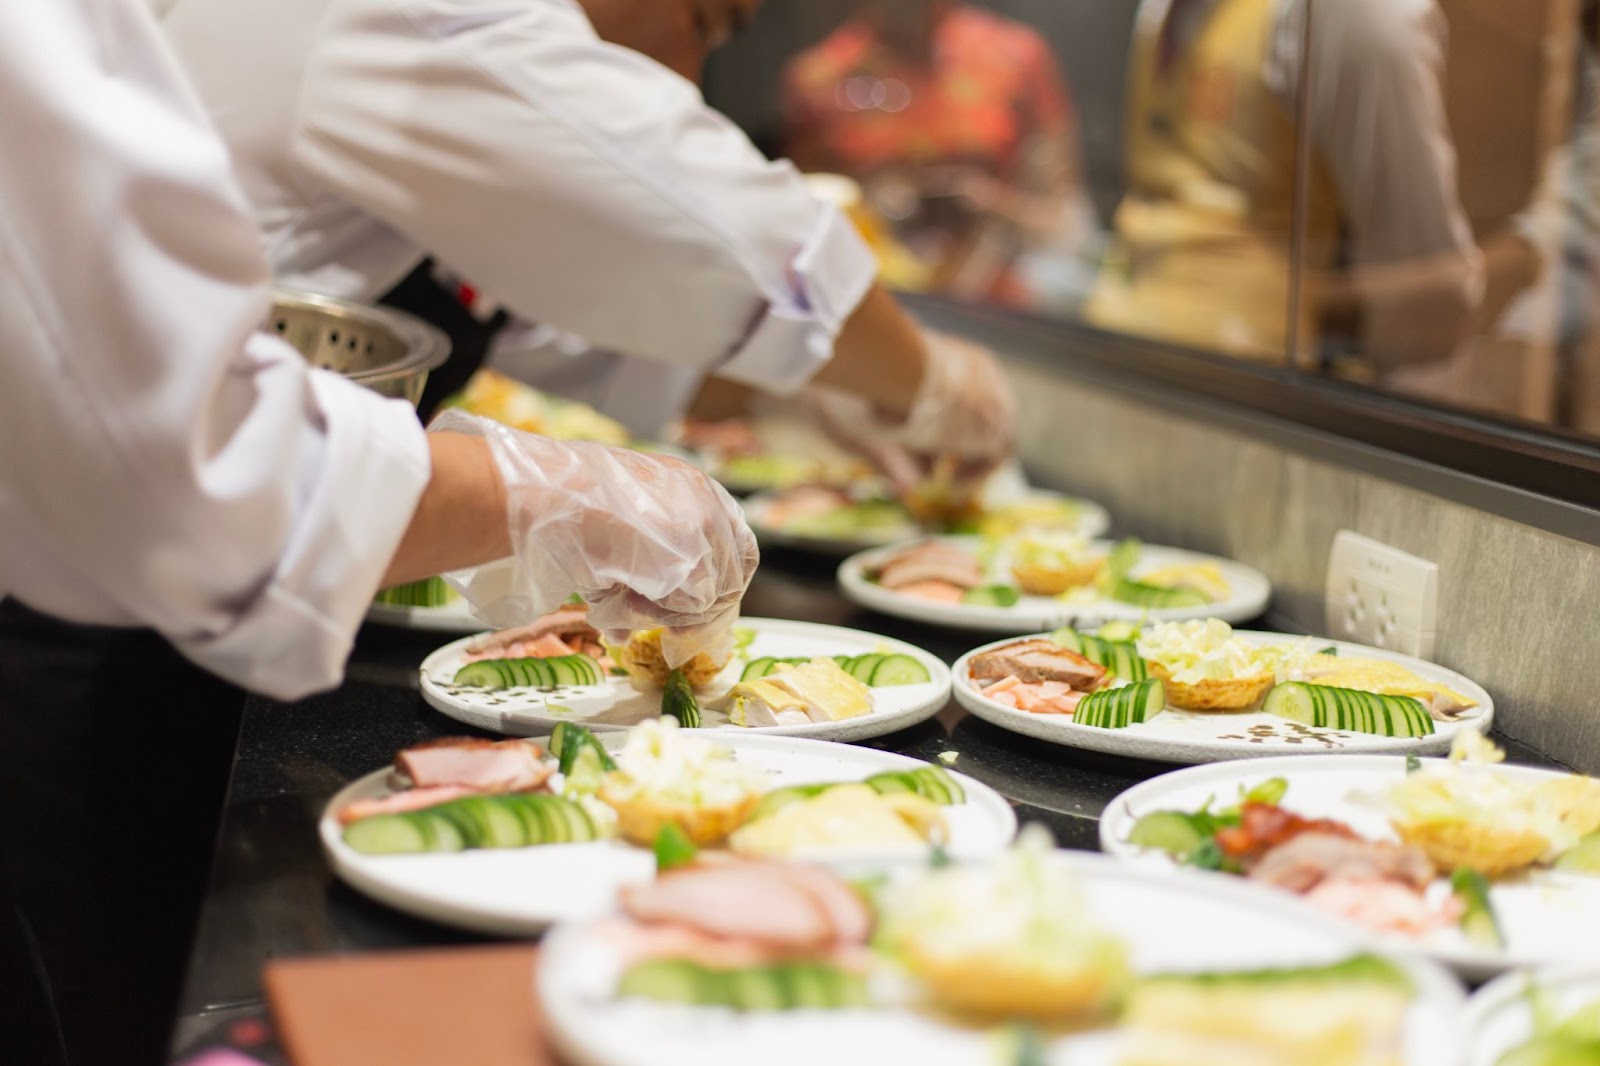 6 Napa Valley Catering Companies To Look For When Choosing A Wedding Caterer